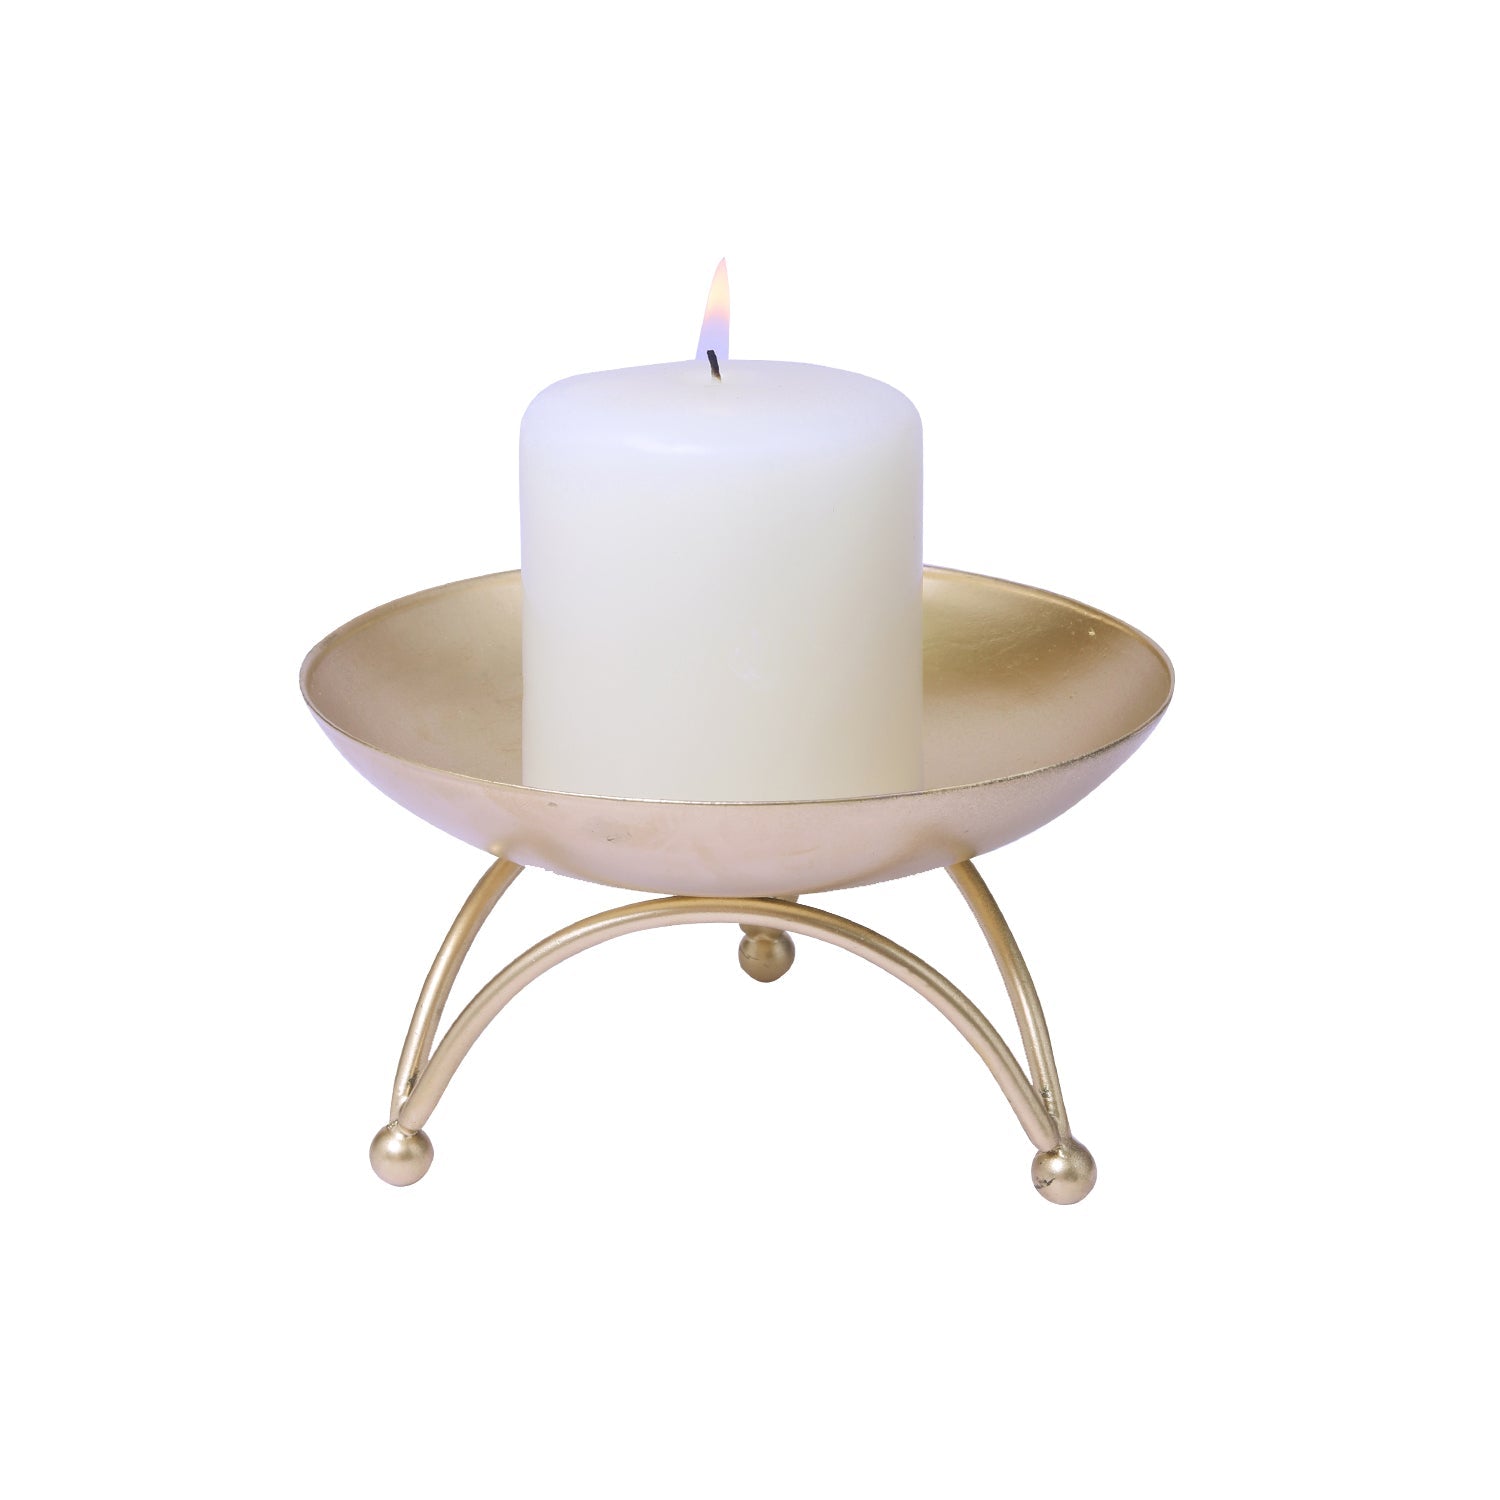 Hosley Decorative Pillar  Candle Holder with 1 pillar candle for Home Decoration, Pack of 1, Gold